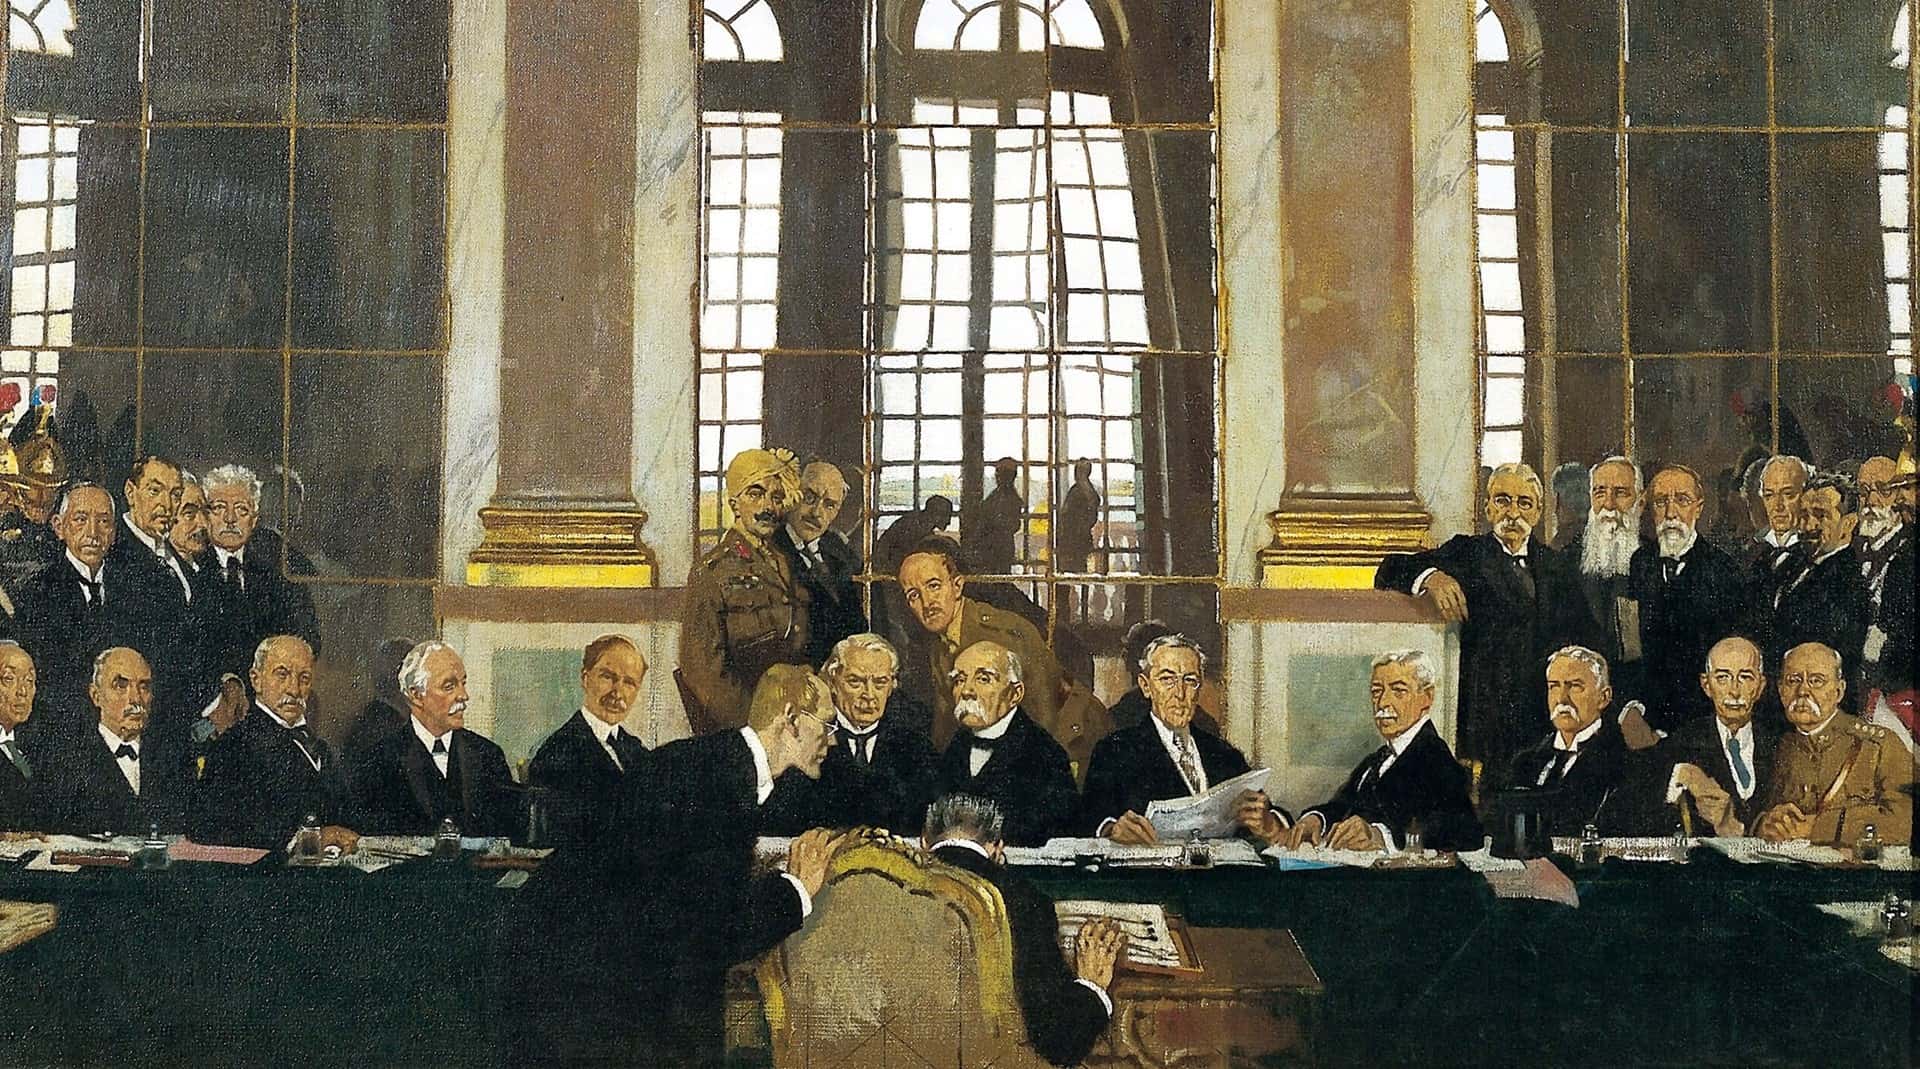 13-facts-about-where-was-treaty-of-versailles-signed